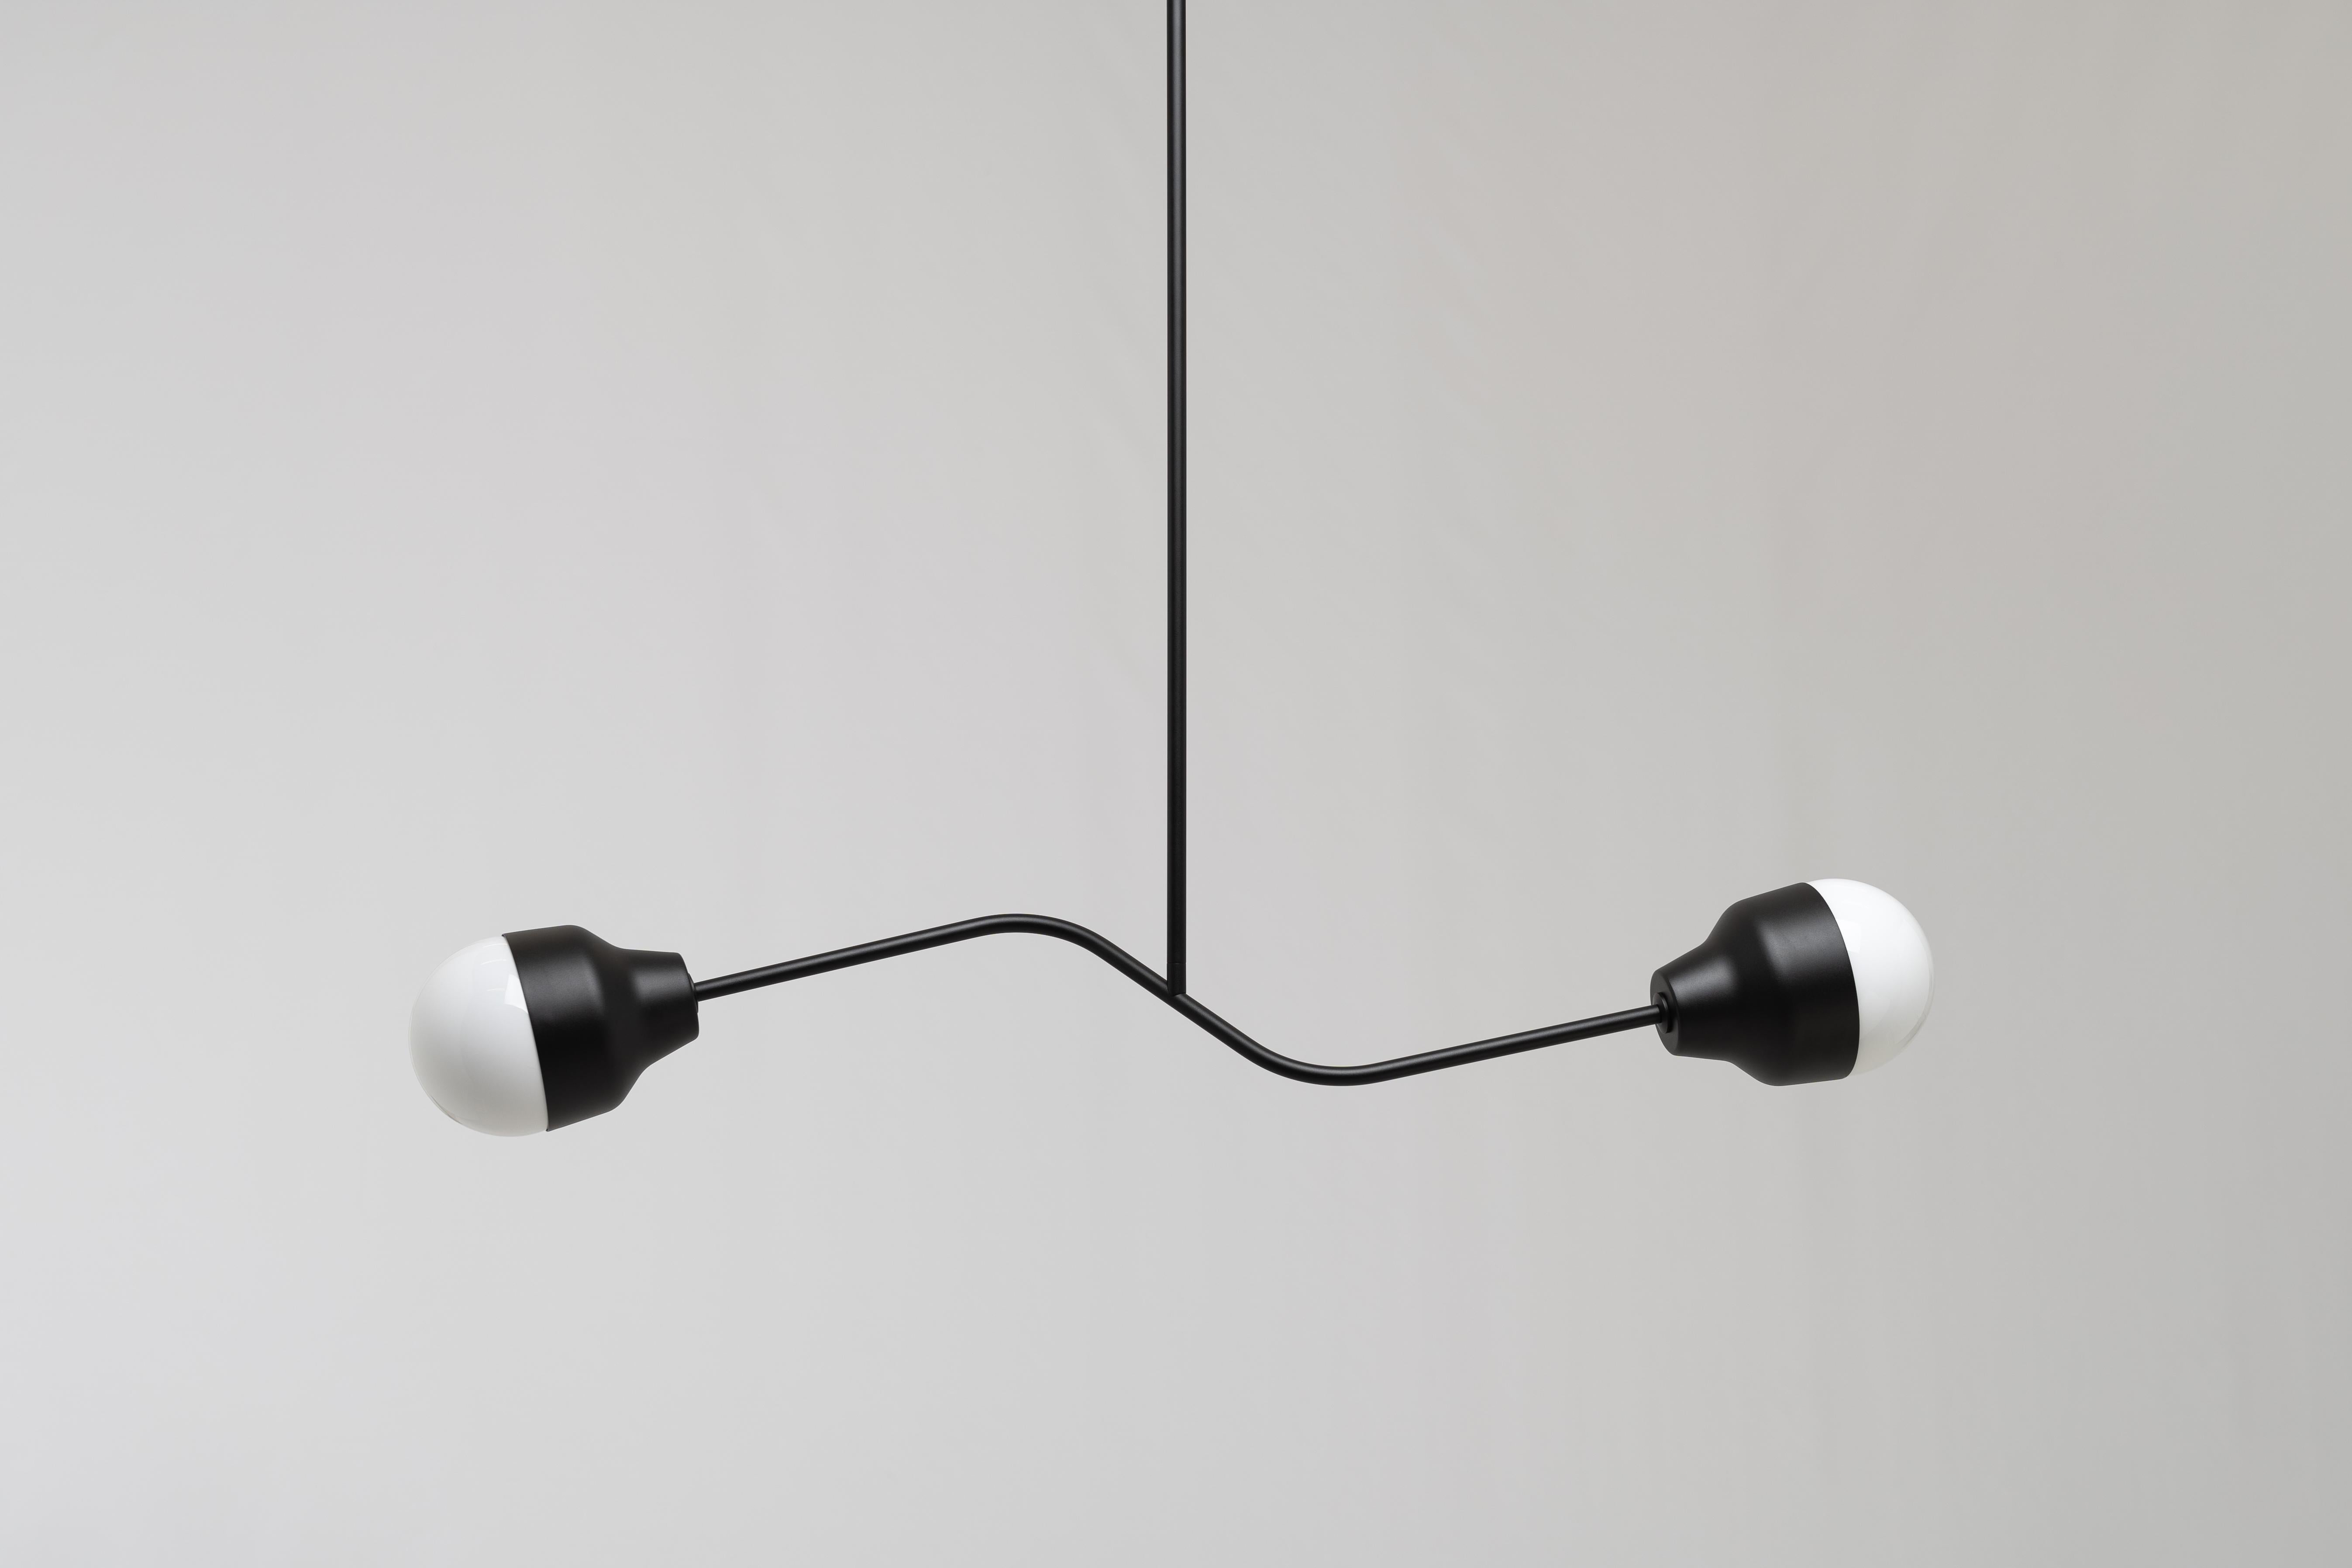 Ambiguo type-03 by Saarepera & Mae
Chandelier

Materials: mouth-blown Murano glass / stainless steel and aluminum
Light source: Built-in LED 100-240V / Dimmable

Dimensions: 
L 126 cm / 49.6 in
W 17.5 cm / 6.9 in

Fixing: 
Hanging from a